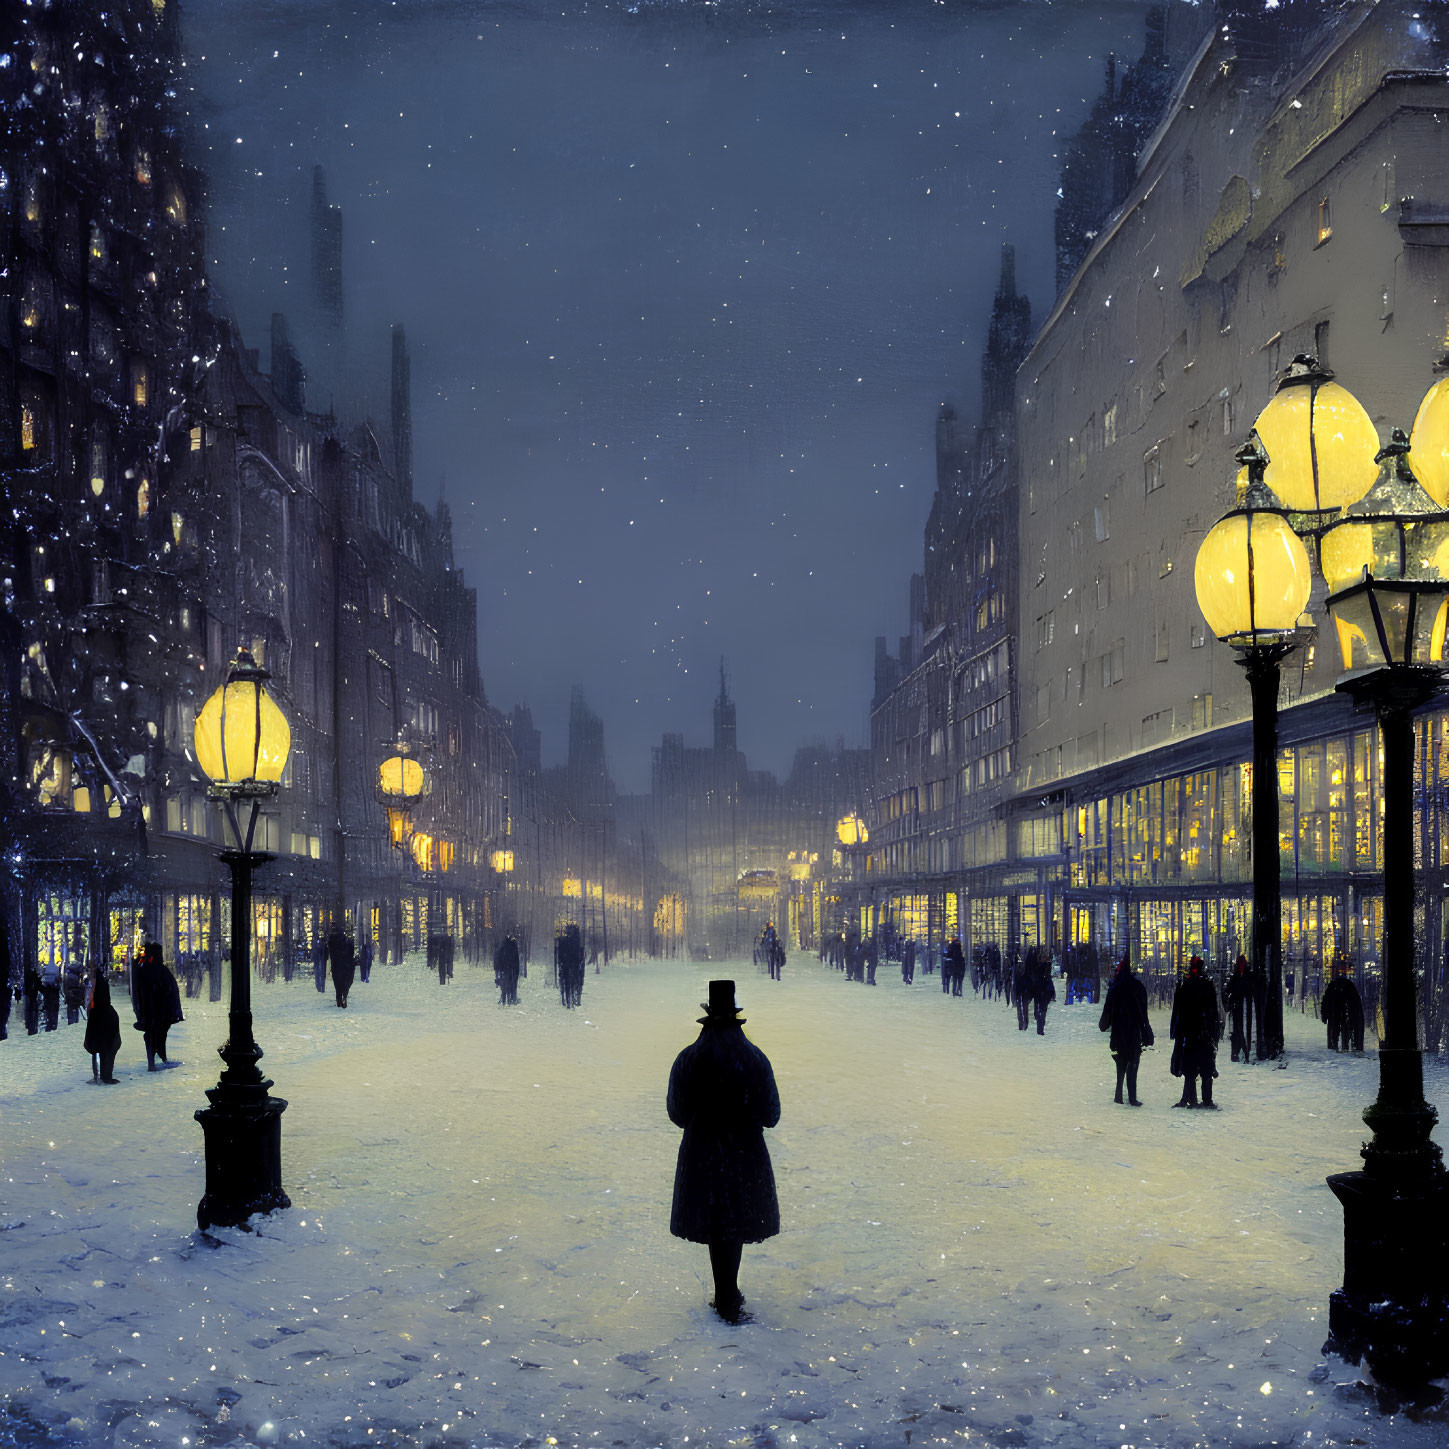 Historic city street on snowy evening with people walking under street lamps